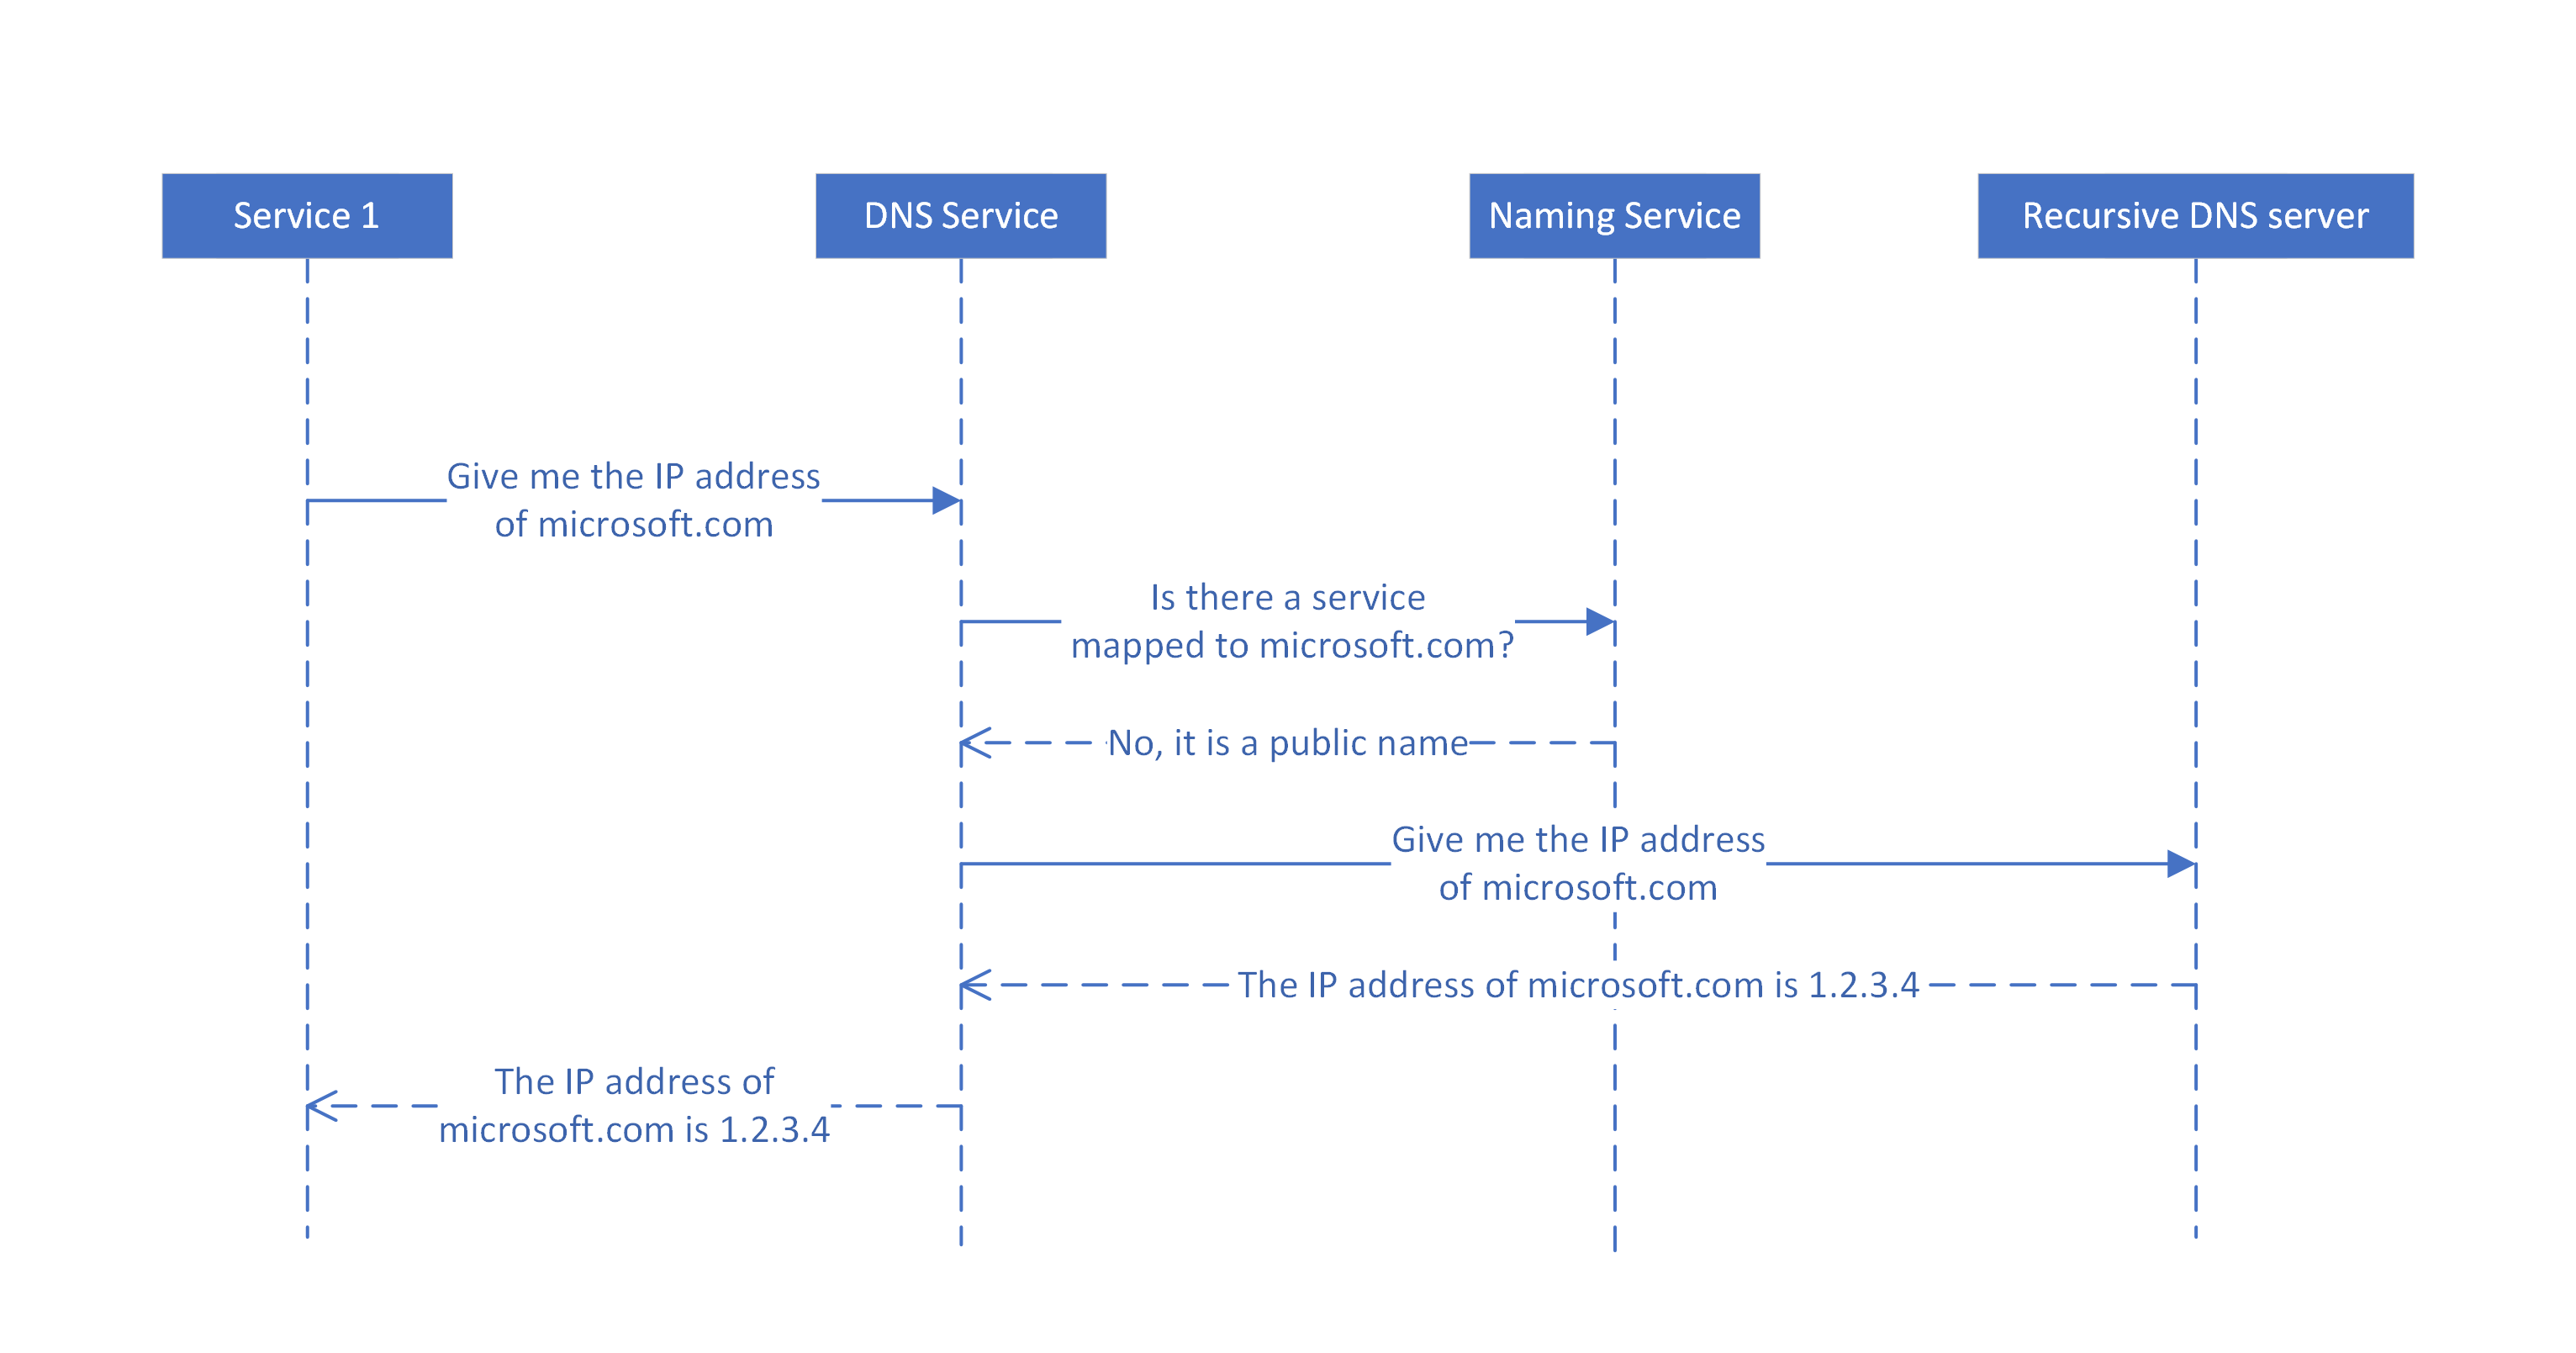 Diagram showing how DNS queries for public names are resolved.